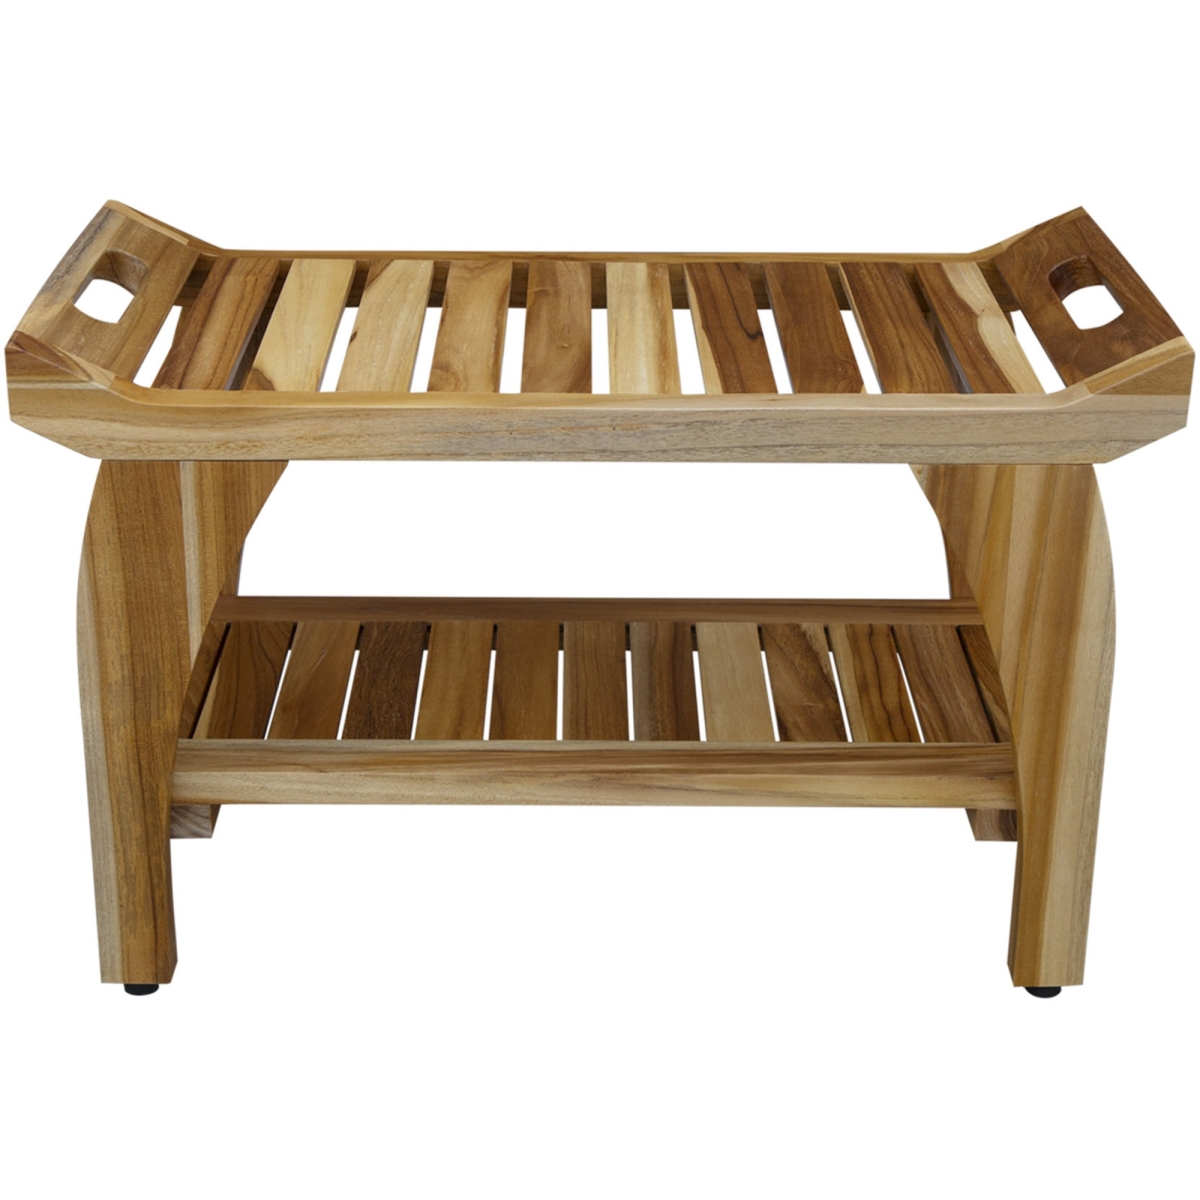 Picture of HomeRoots 376722 Rectangular Teak Shower Bench with Handles in Natural Finish